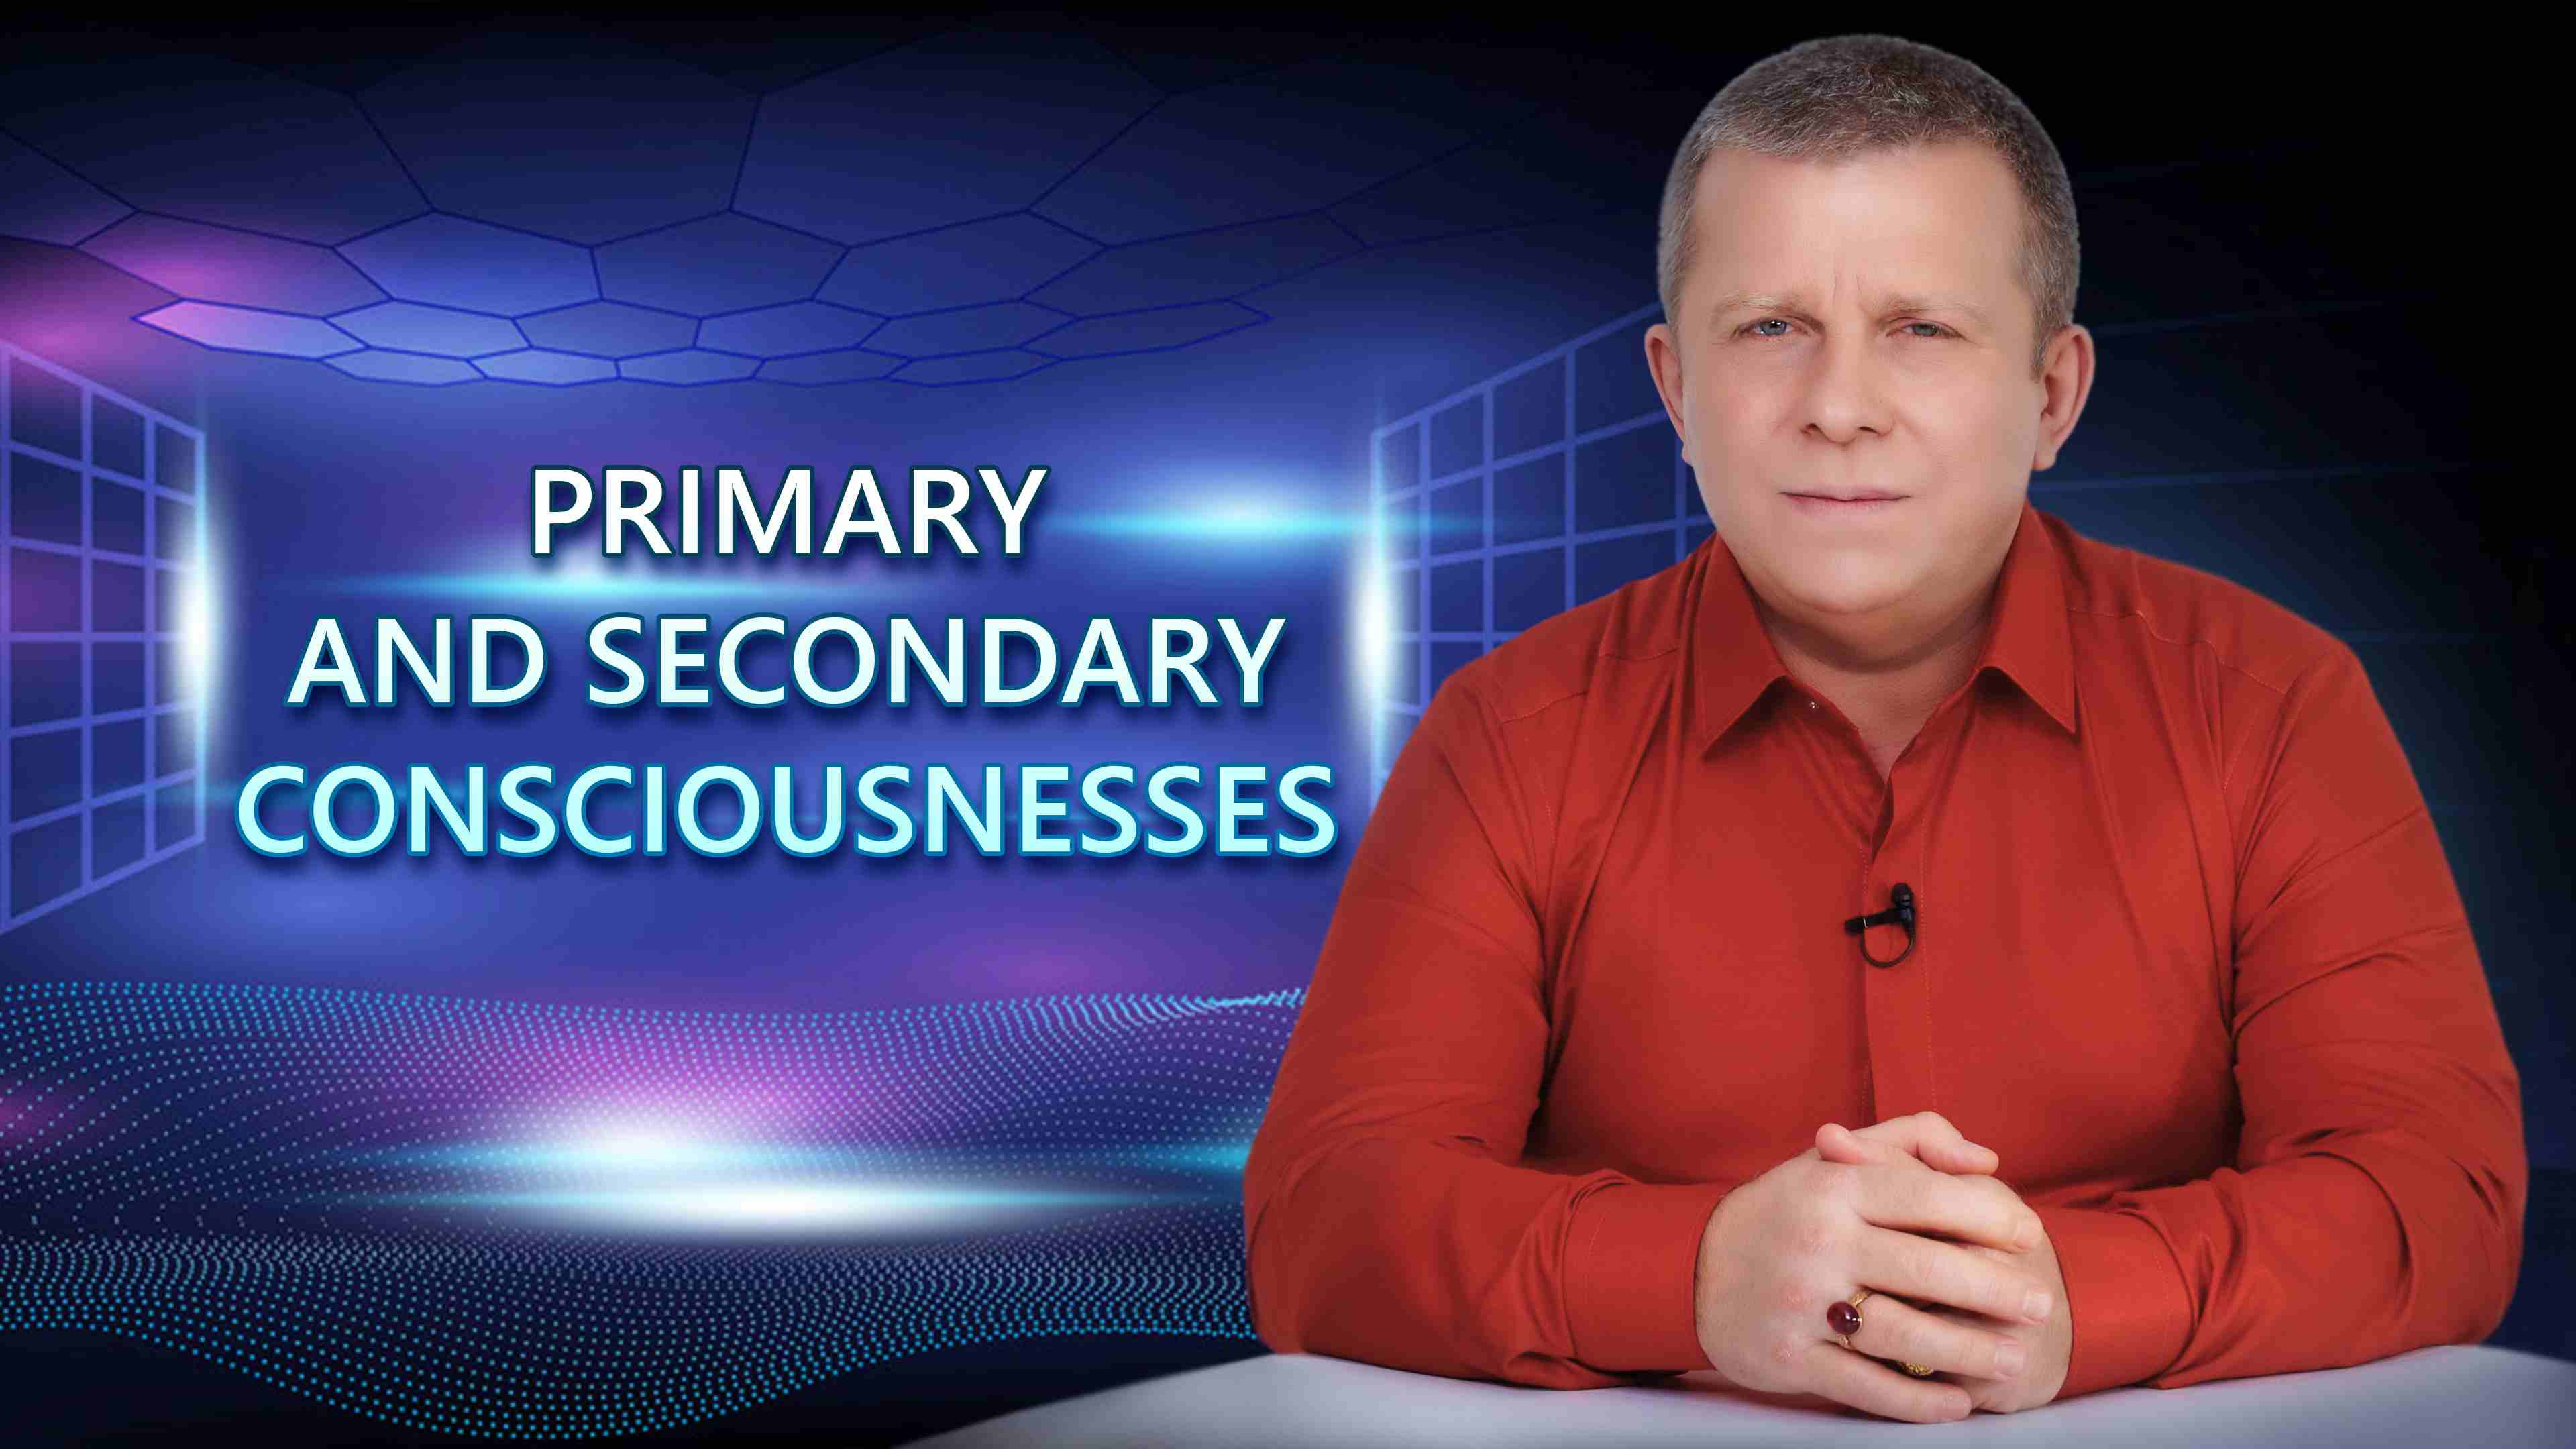 Primary and Secondary Consciousnesses